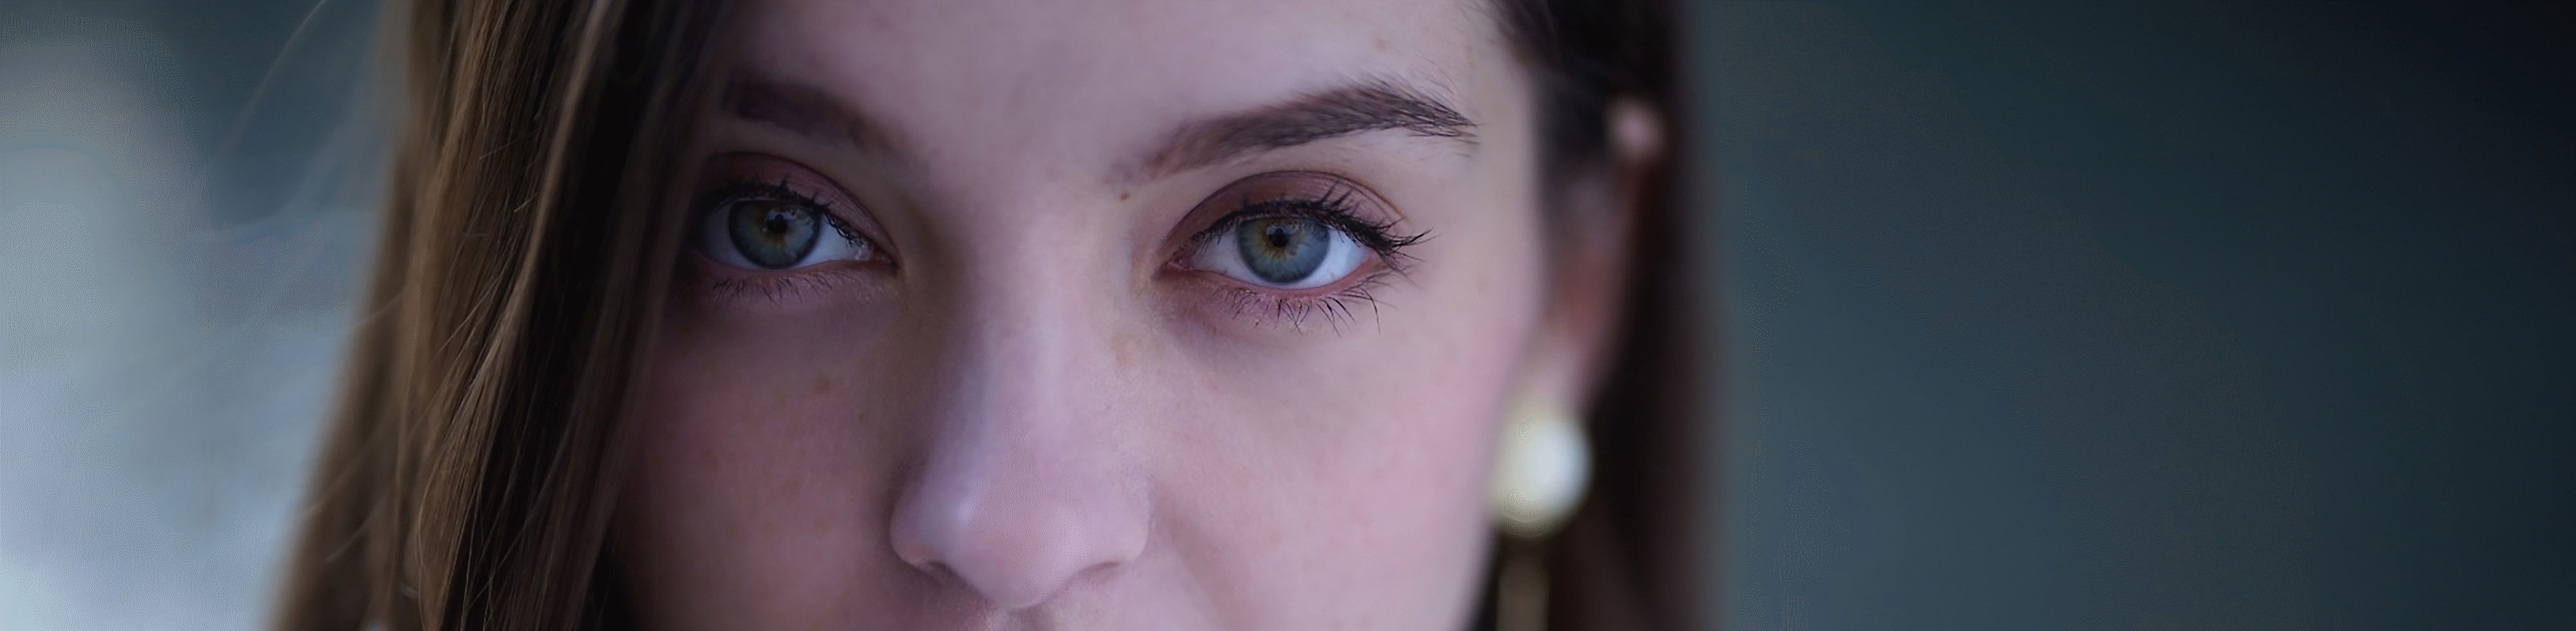 Close-up facial portrait of female model, with resolution of subject standing out against bokeh